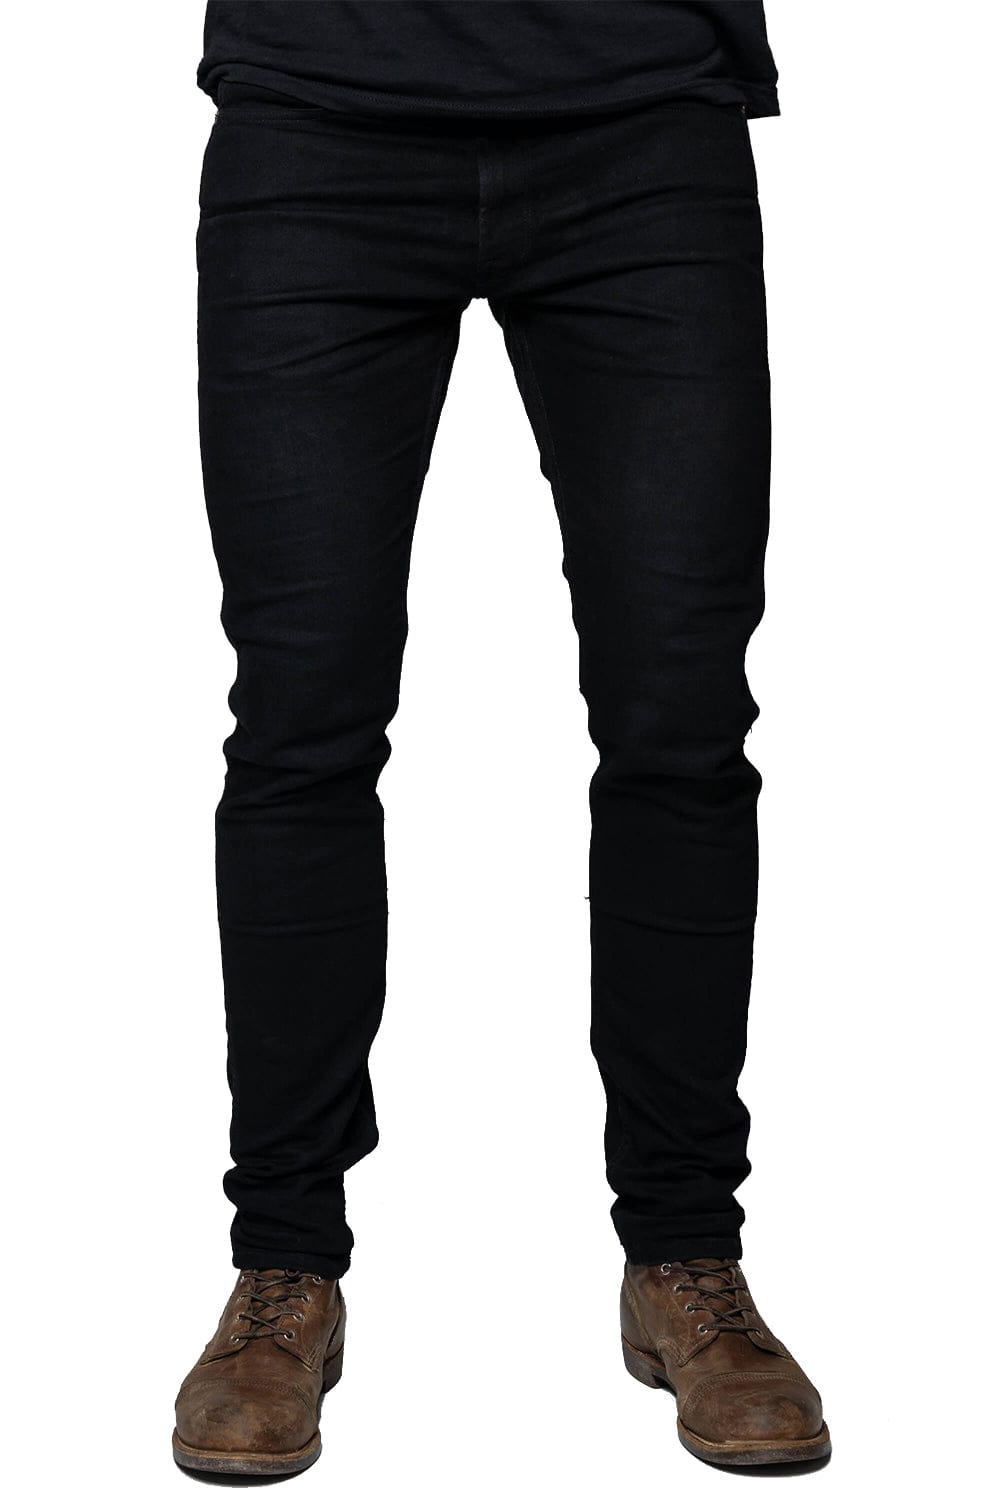 Riot Skinny Fit Protective Riding Jeans. Feat. Protective DuPont